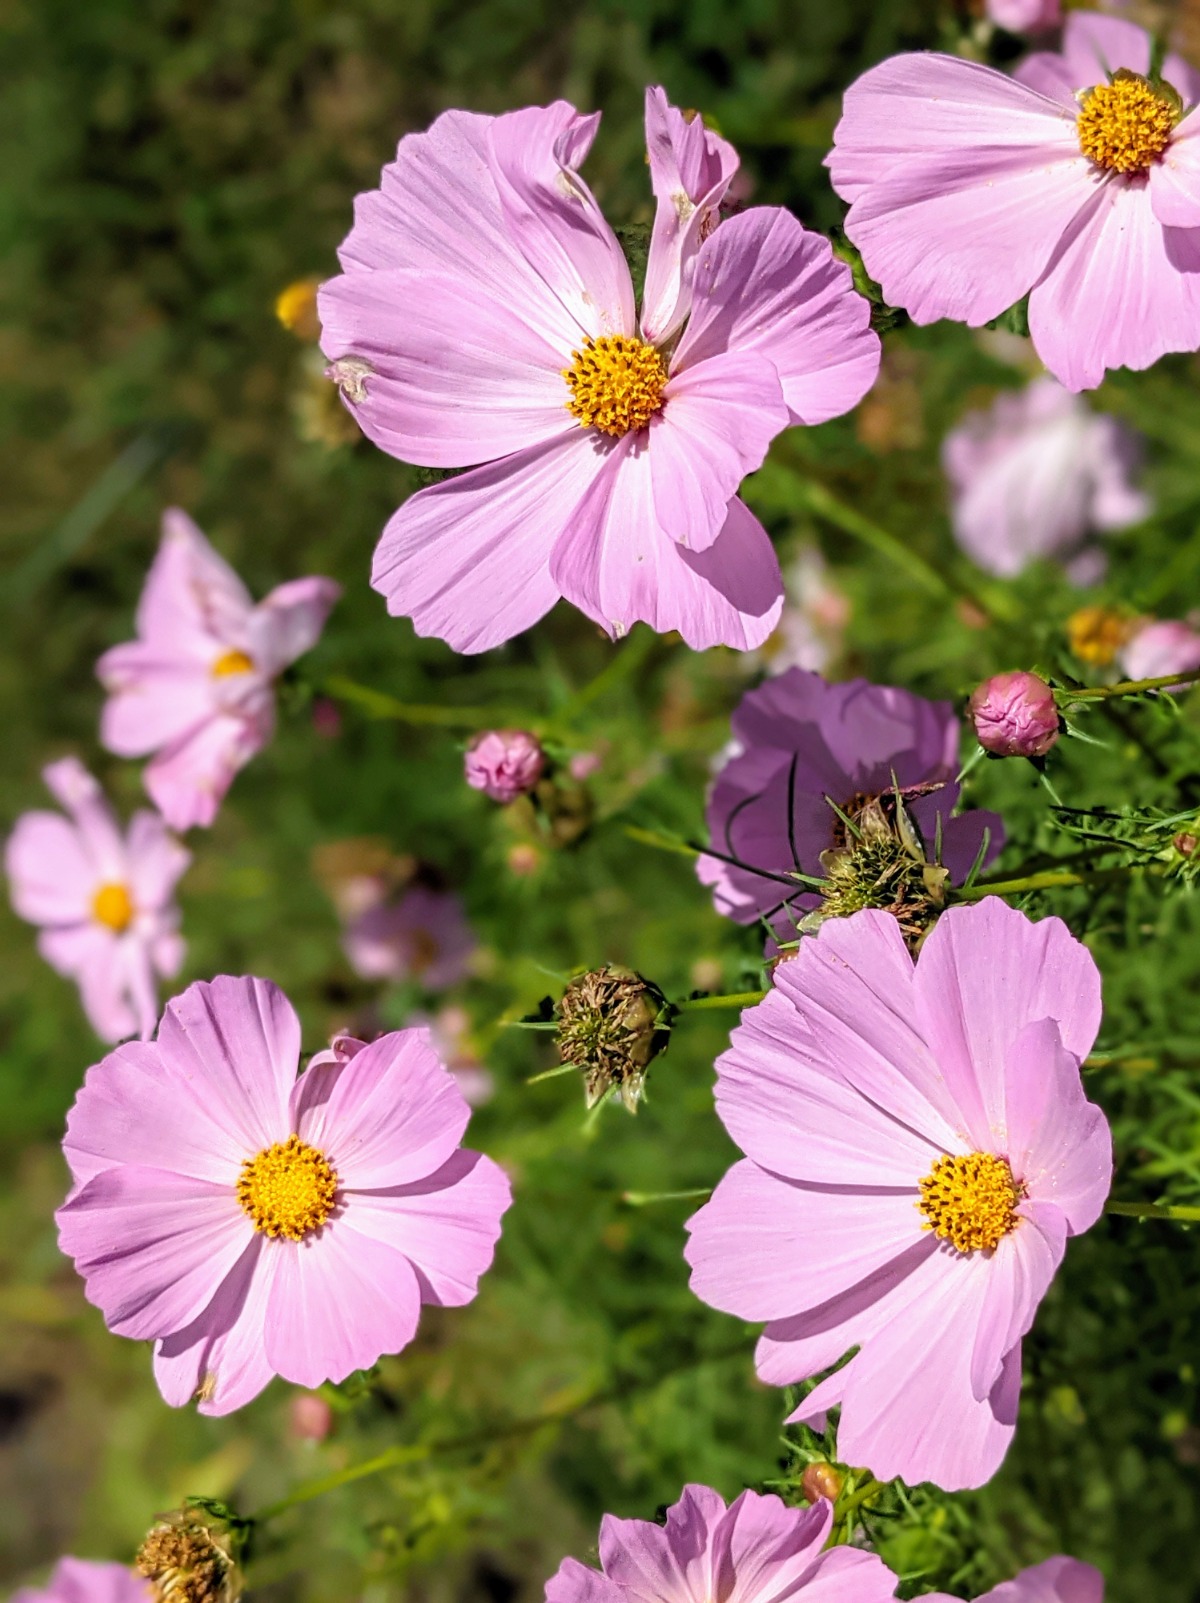 Pale pink cosmos with prolific blooms